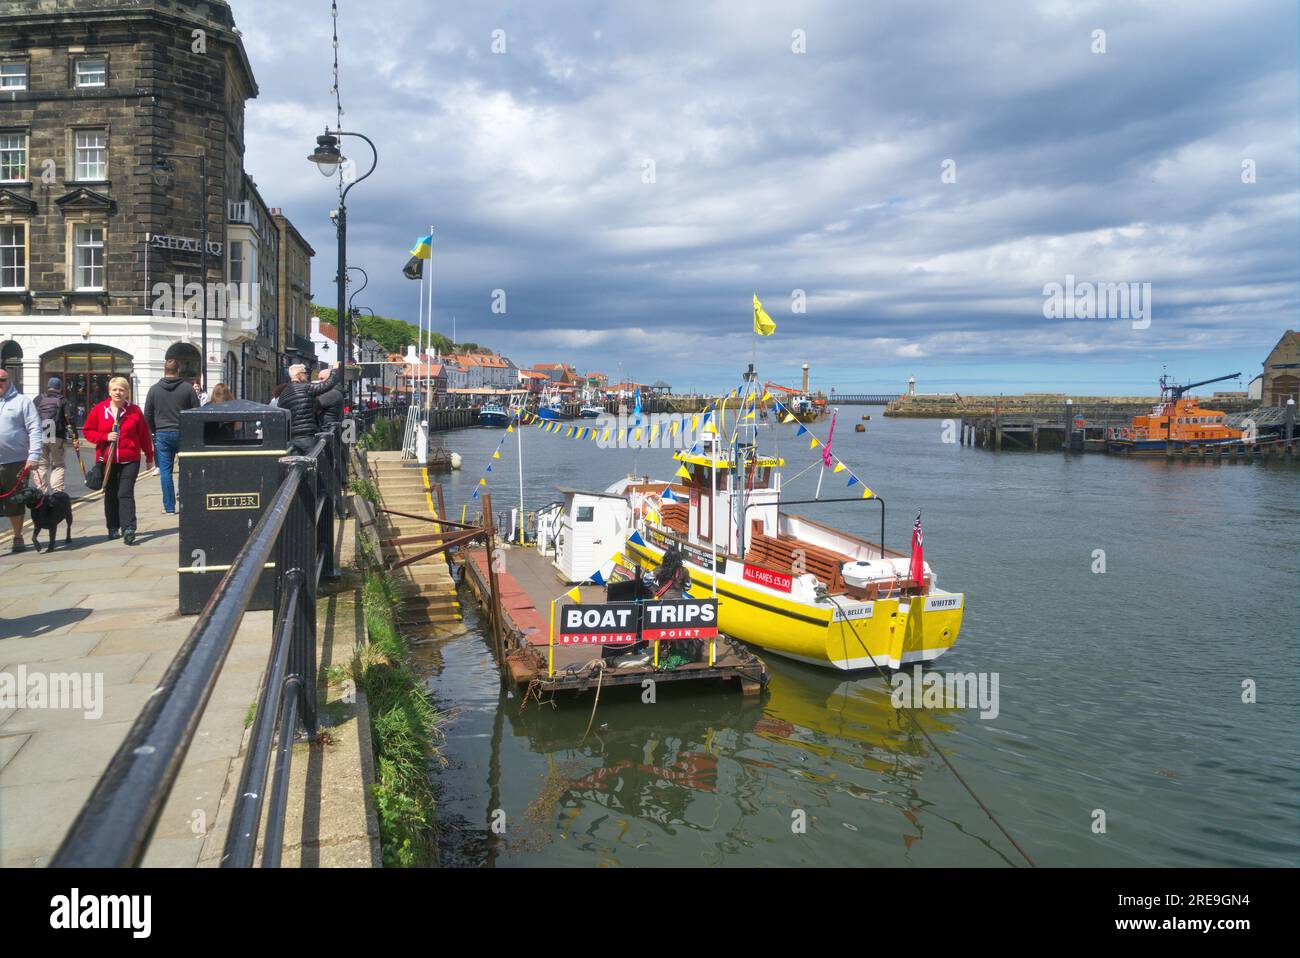 Looking east over historic Whitby keyside, wharf, beside the river Esk.   The river splits the town of Whitby in two. Whitby, North Yorkshire, UK Stock Photo